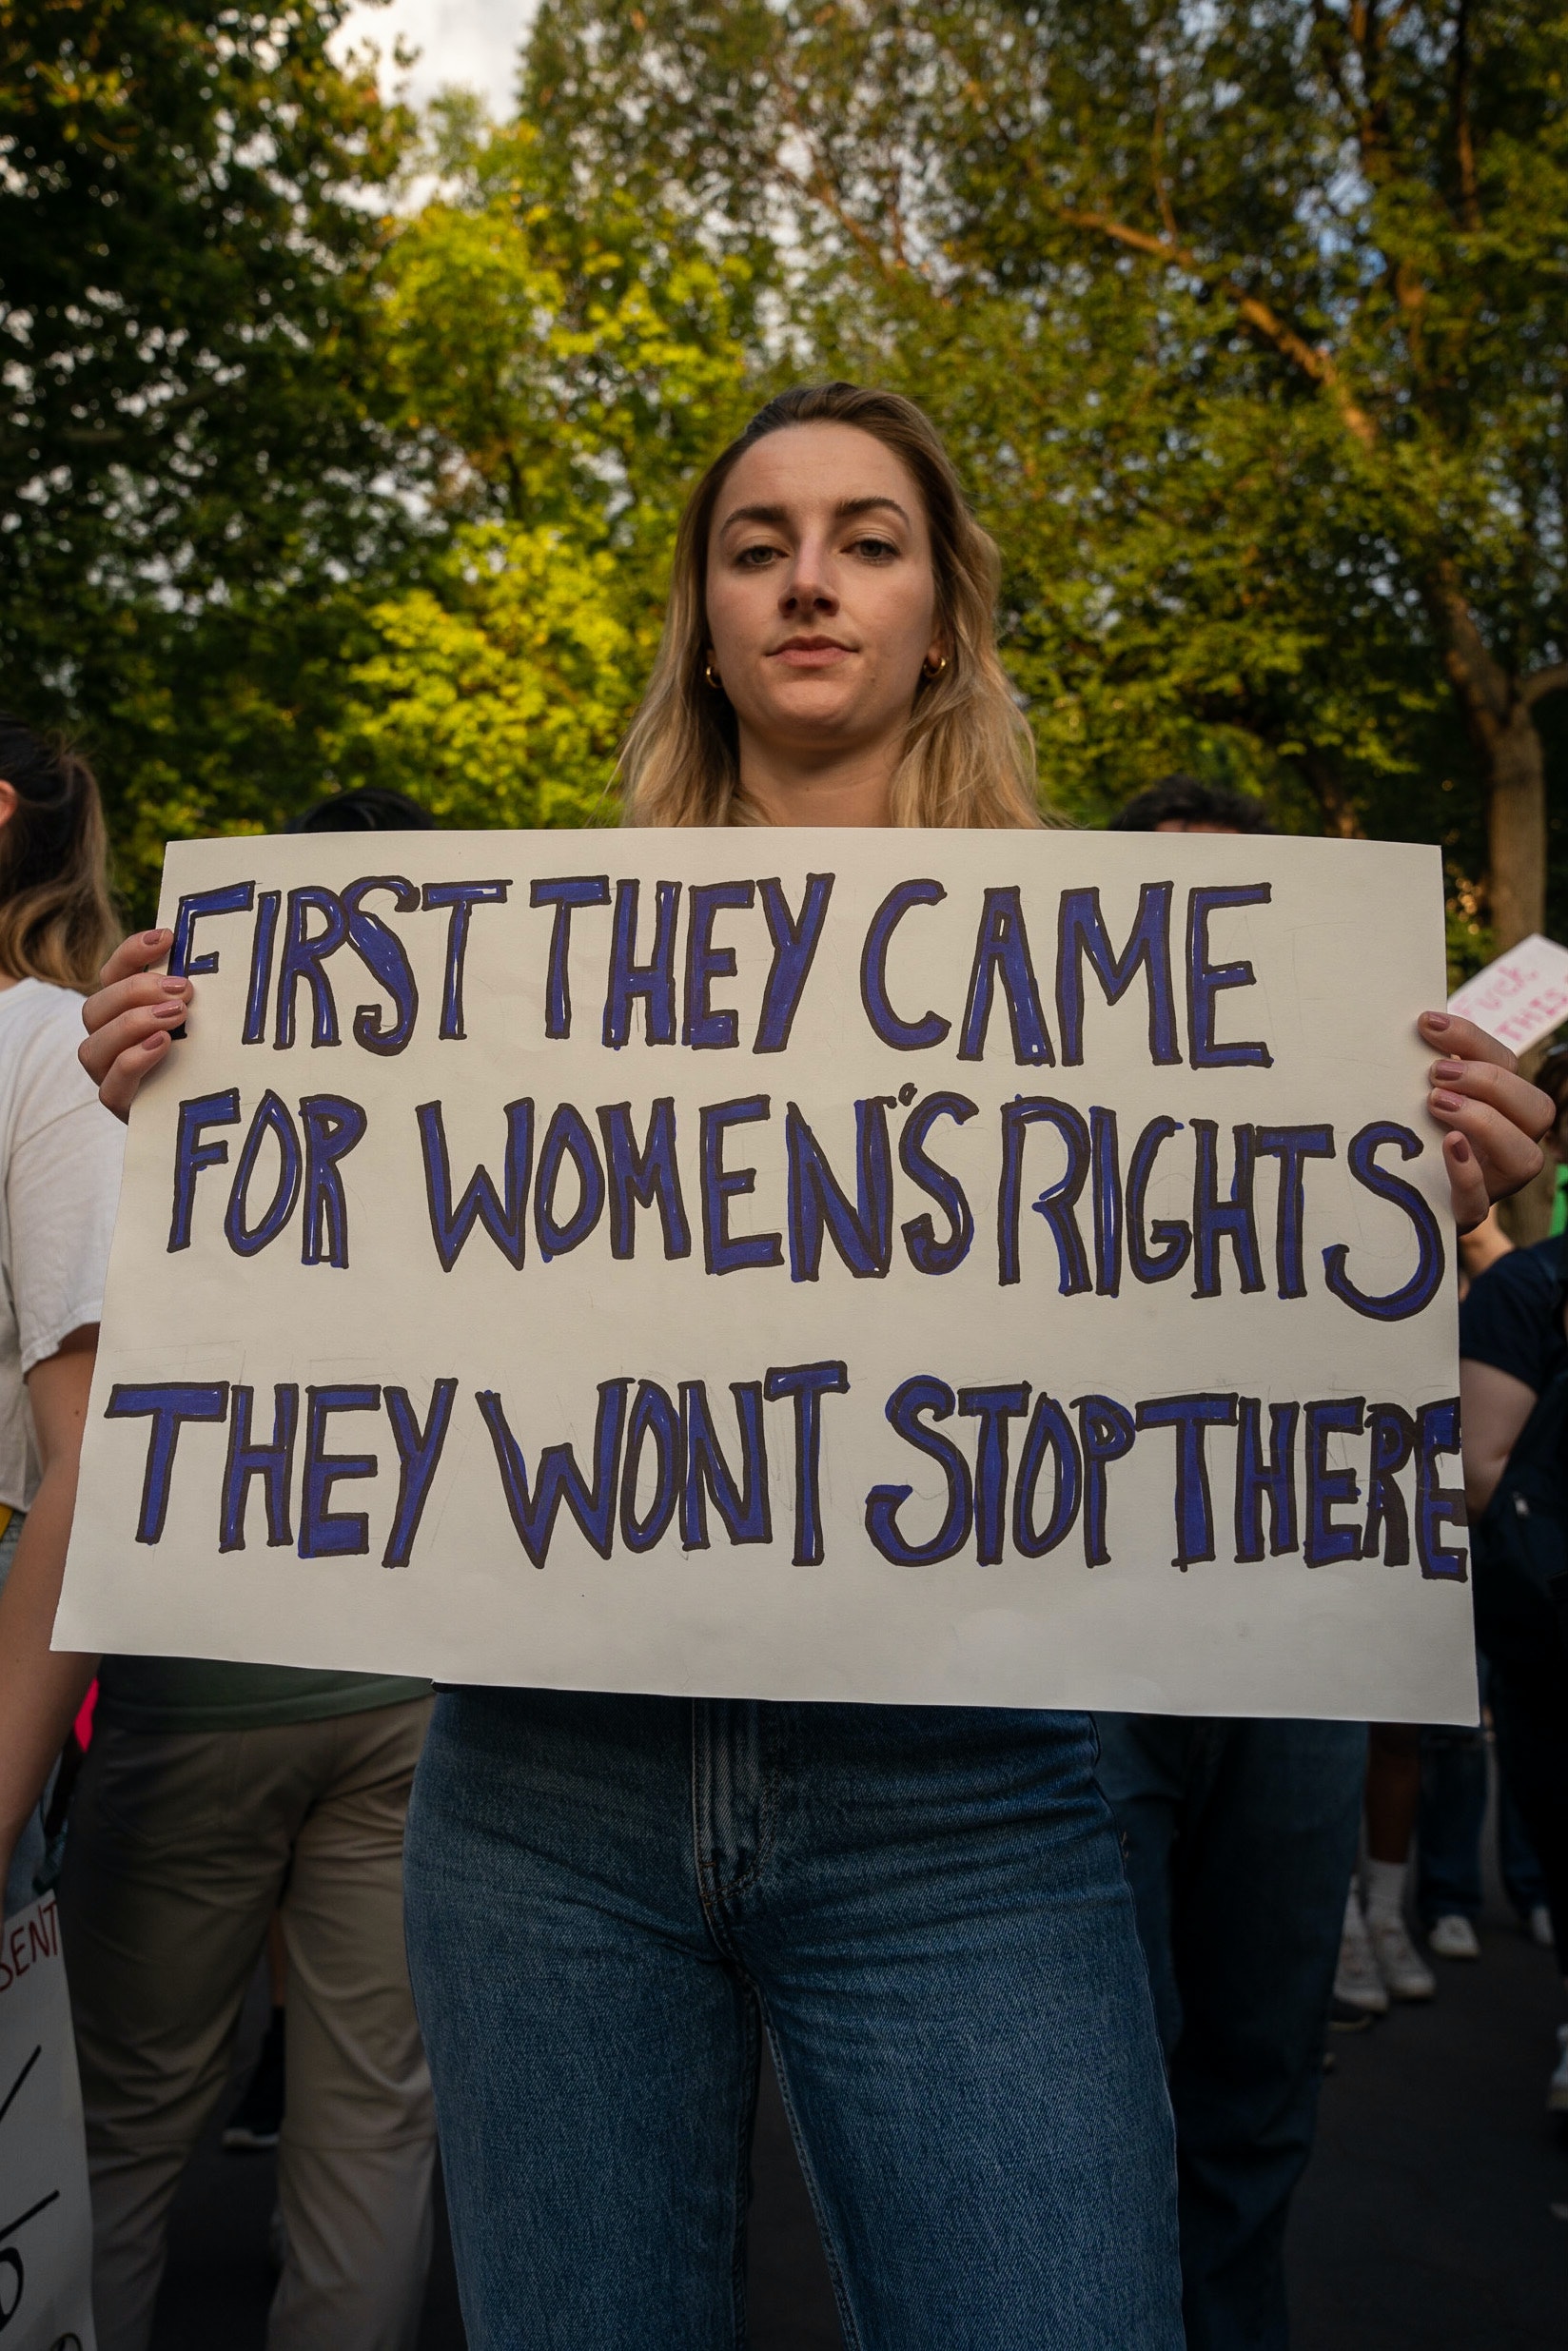 A young women holding a sign that reads "first they came for women's rights they won't stop there"